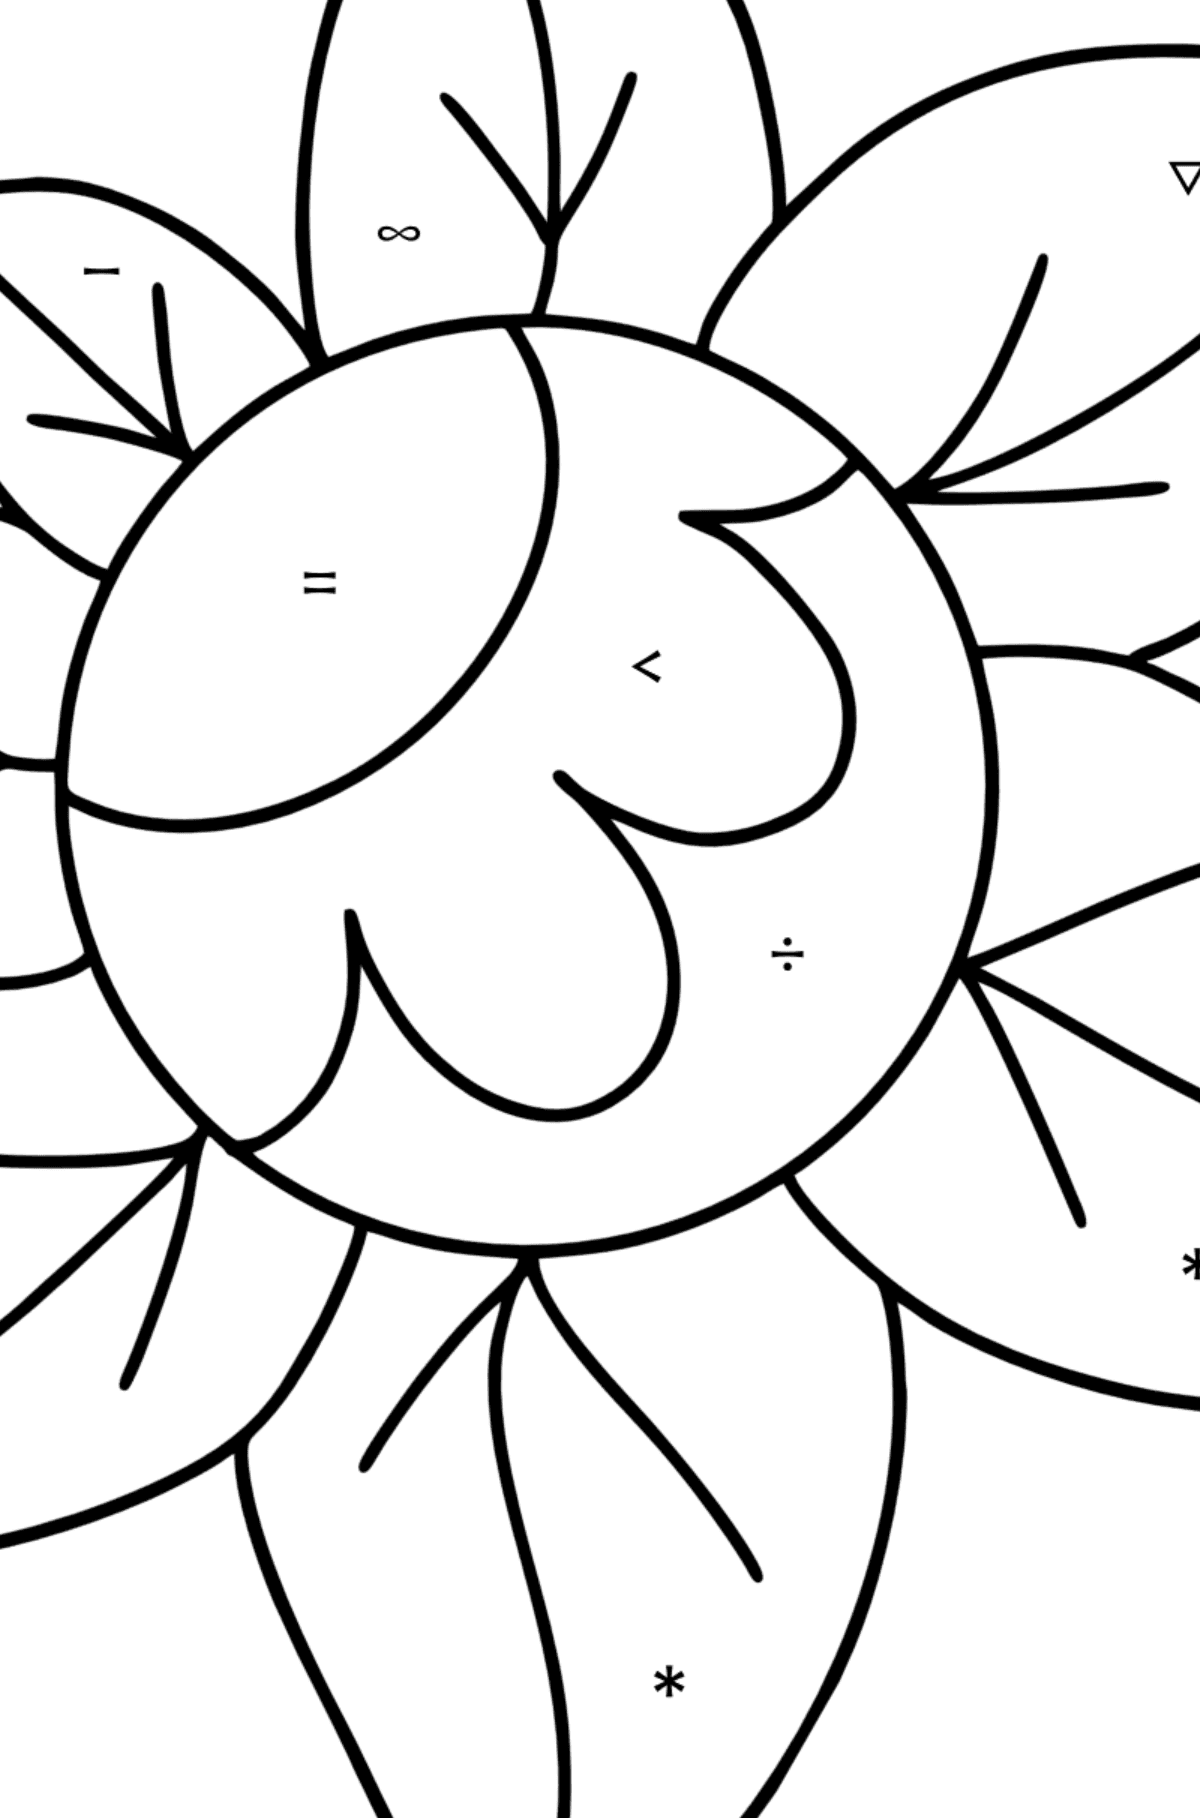 Zentangle Art flower coloring page - Coloring by Symbols for Kids